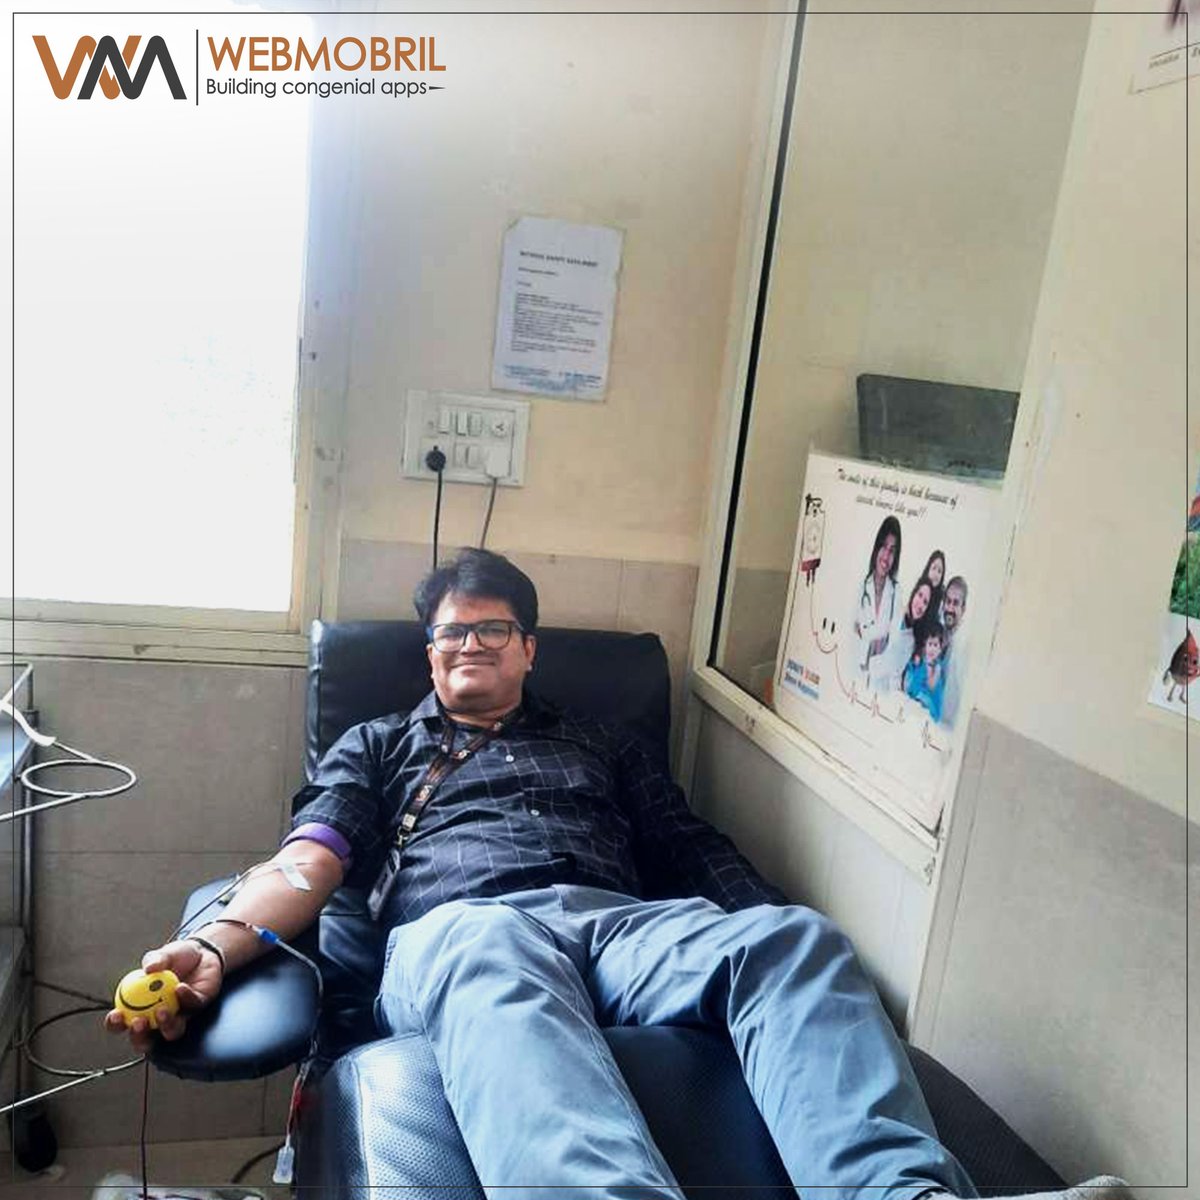 Donating blood exemplifies heroism by saving lives and showcasing solidarity, ultimately enhancing the well-being of patients.
.
.
.
#blood #blood_donation #donation #noble #cause #noblecause #SevaAndGratitude #donateblood #WebMobril